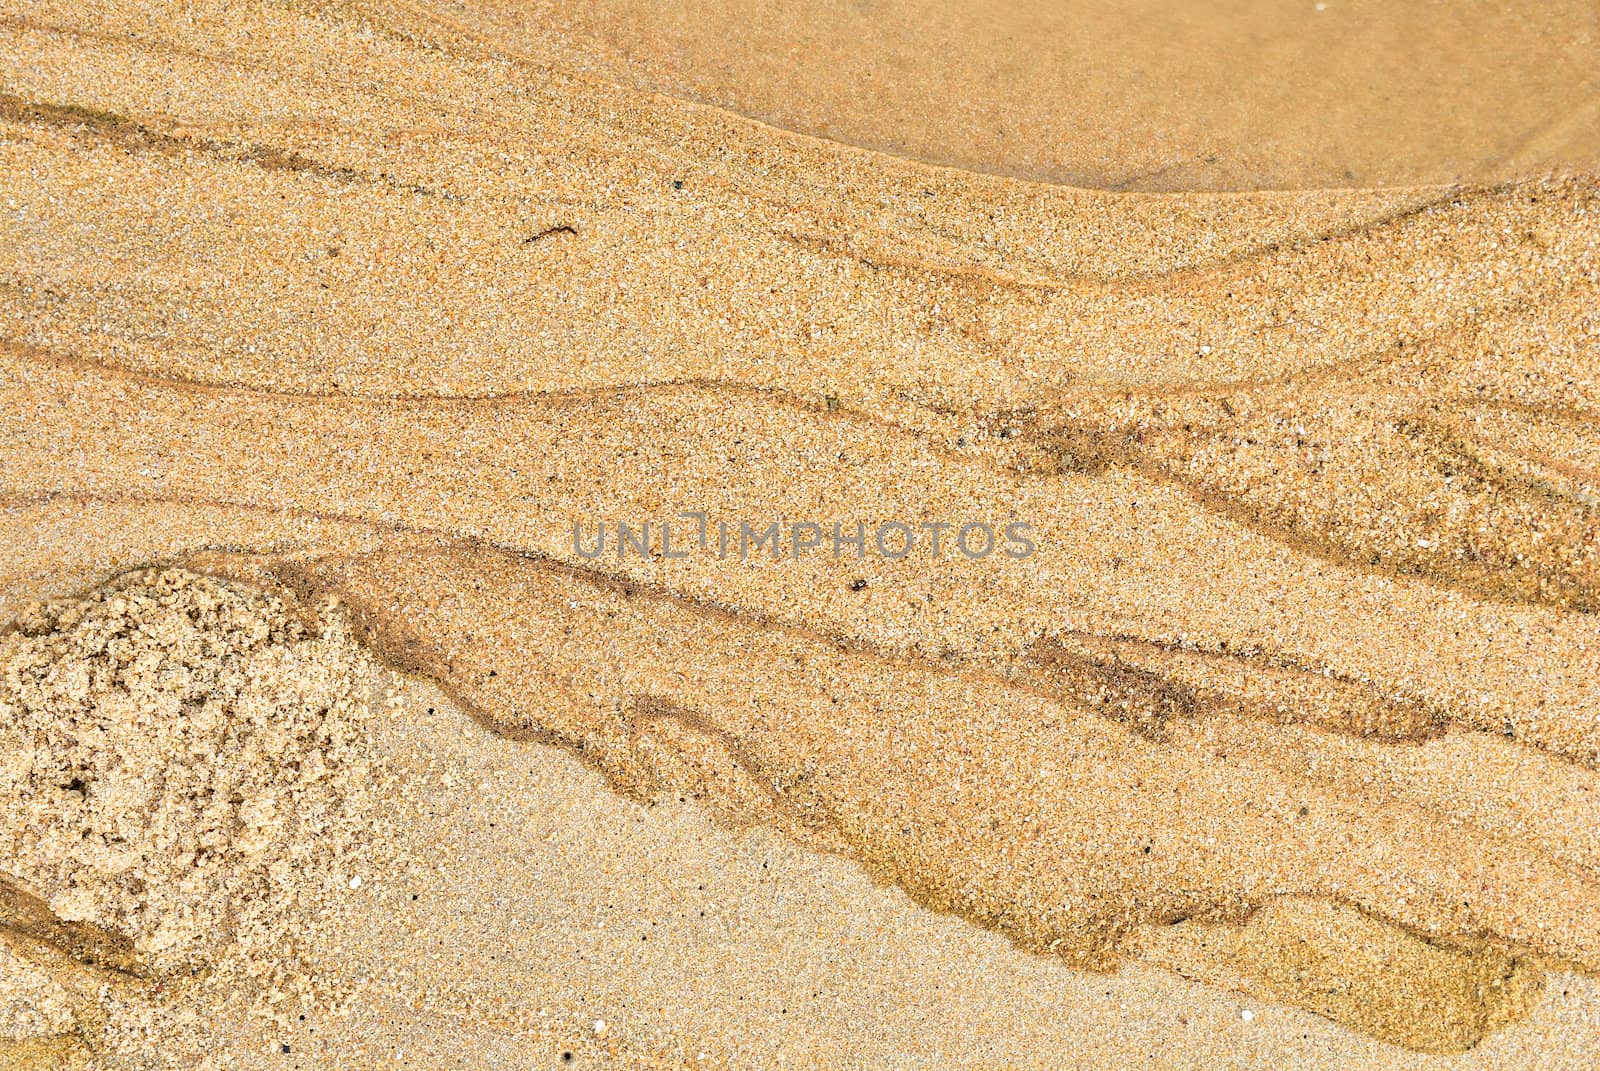 Texture of sand and waste water leak on beach .